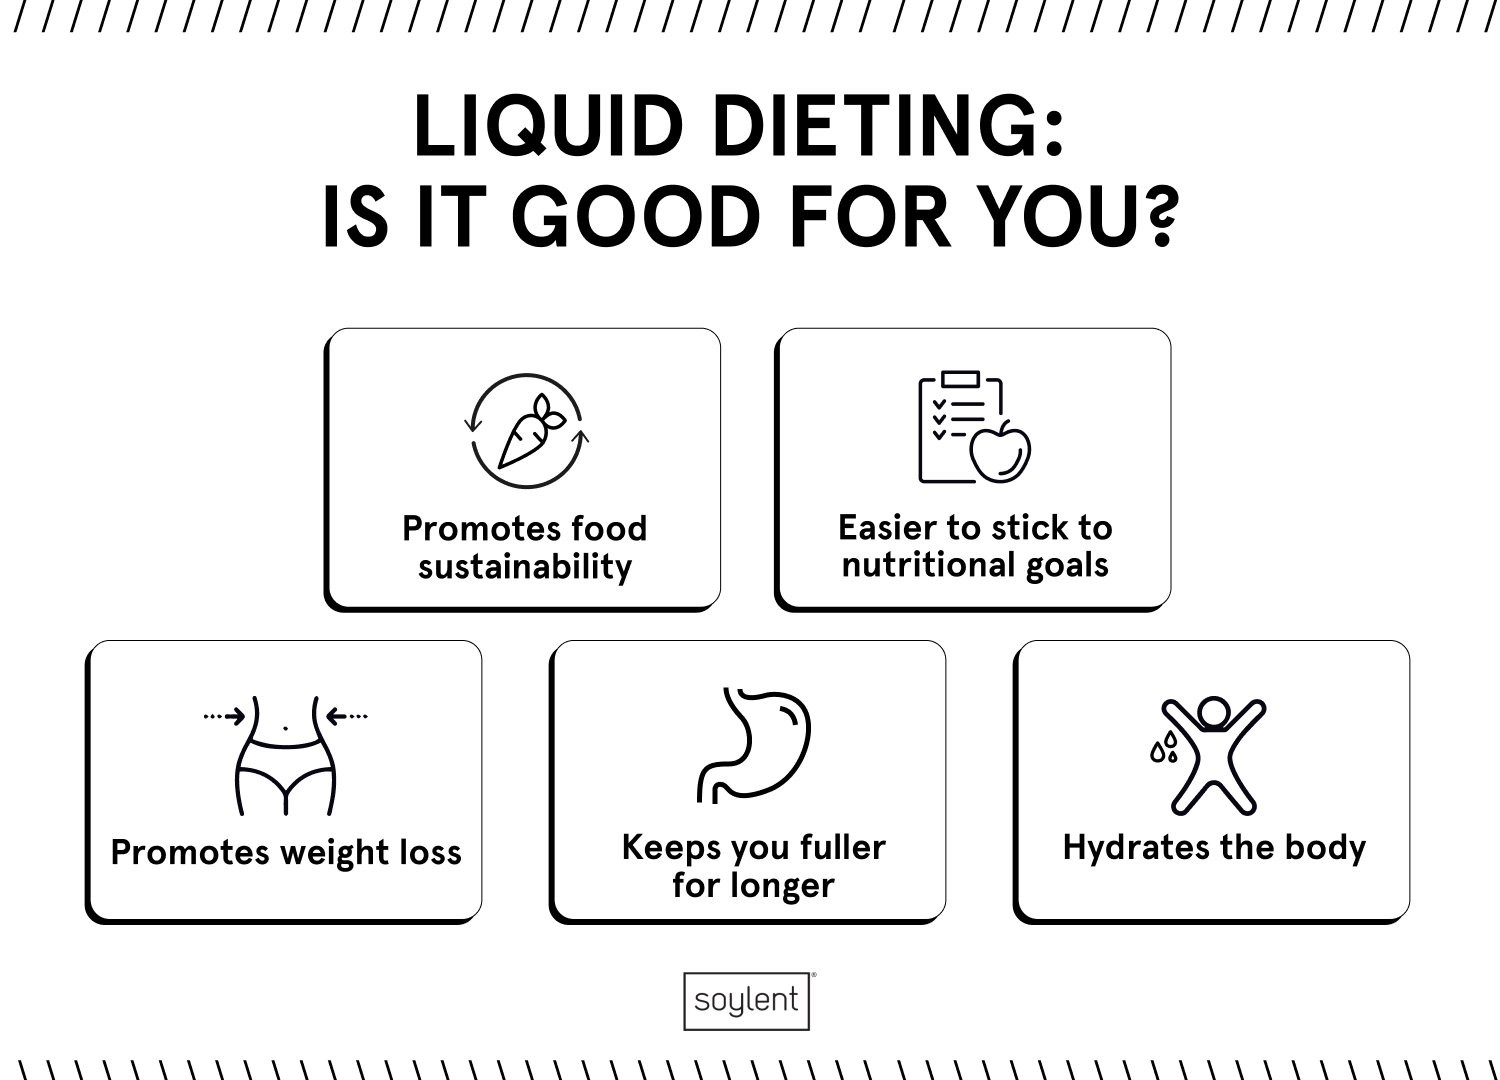 Is Liquid Dieting Good For You?